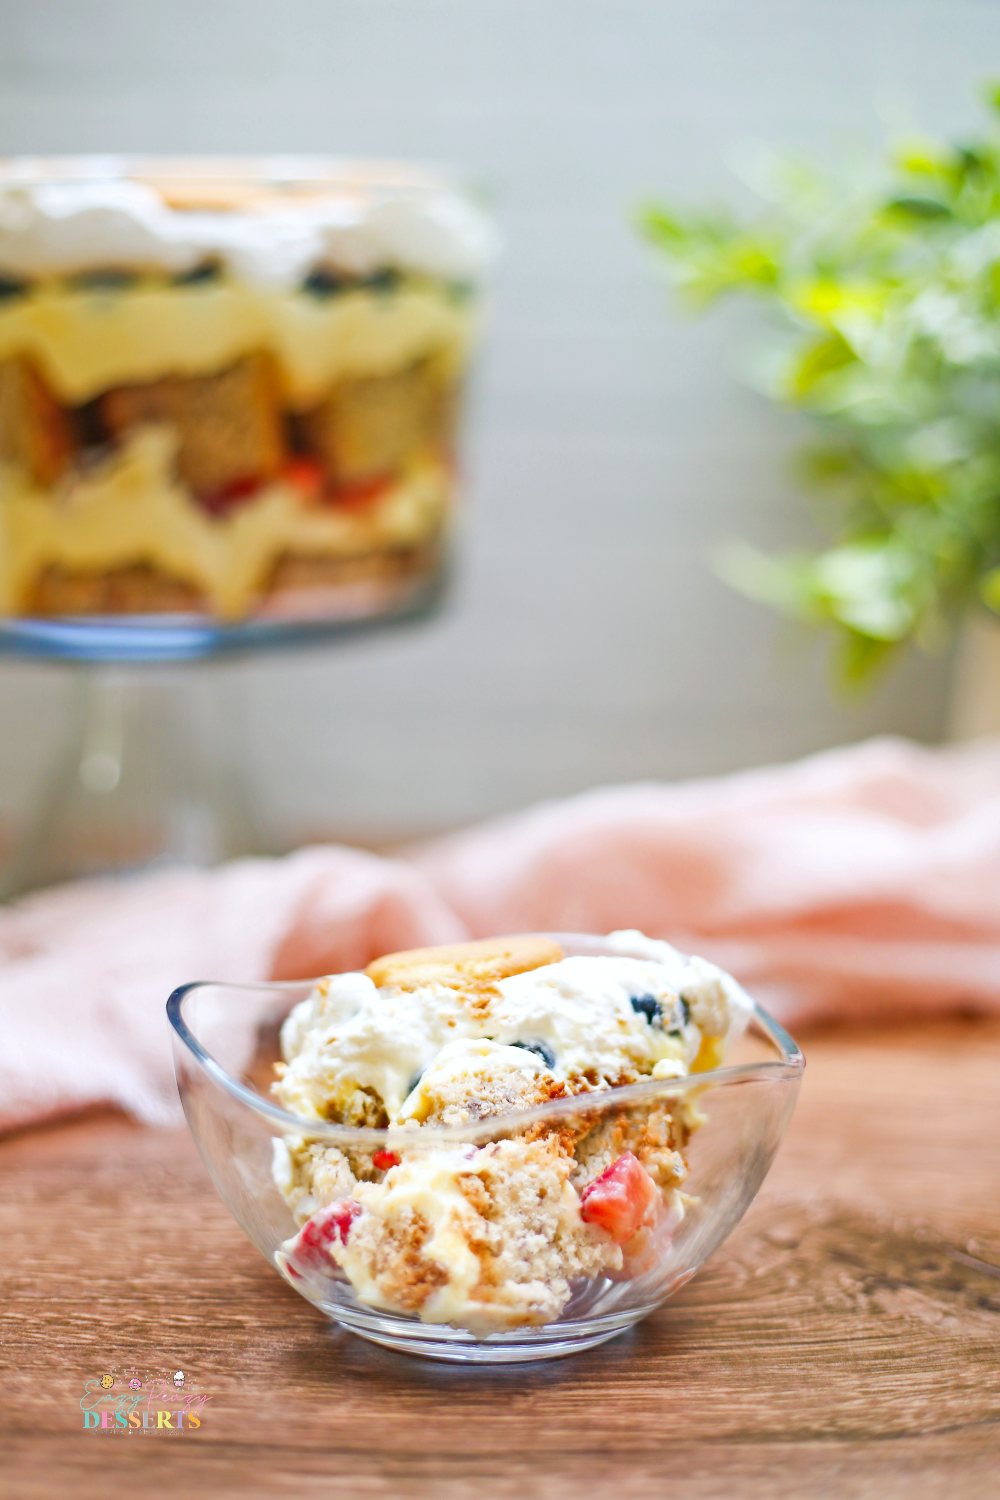 Close up image of cake trifle made with banana cake trifle, strawberry and blueberry